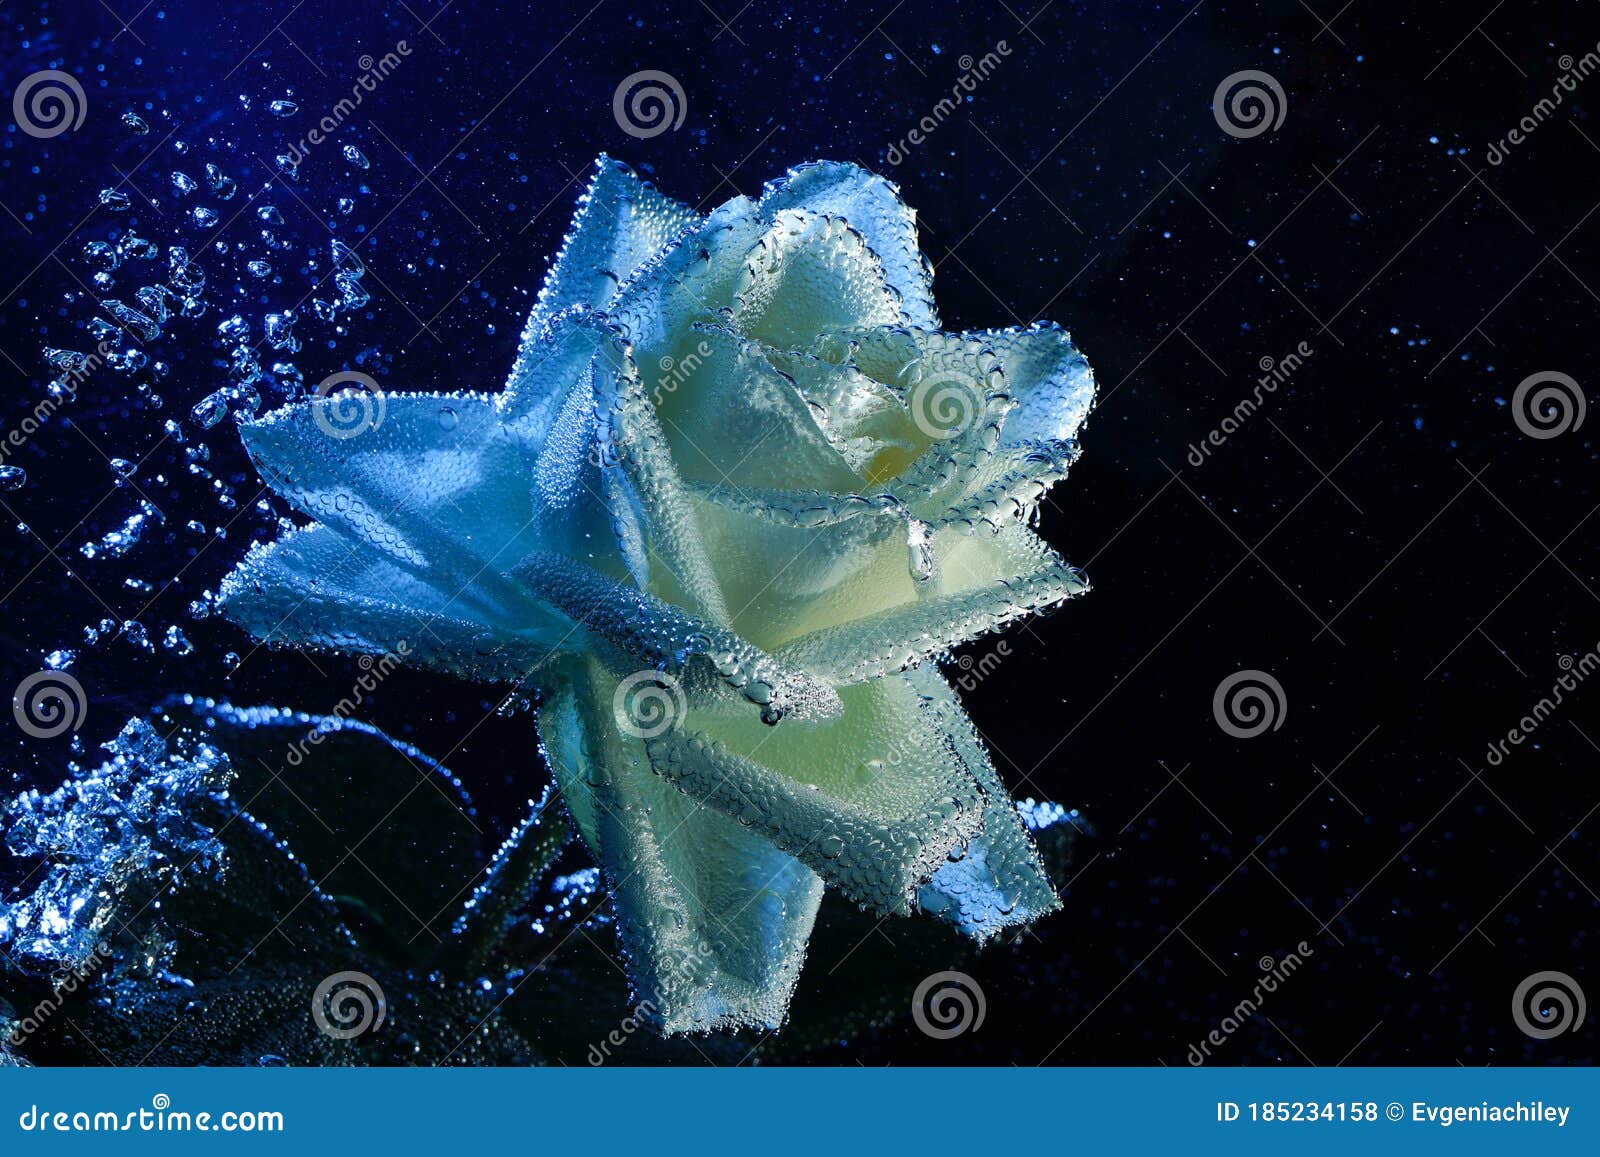 2 522 Blue Rose Water Drops Photos Free Royalty Free Stock Photos From Dreamstime